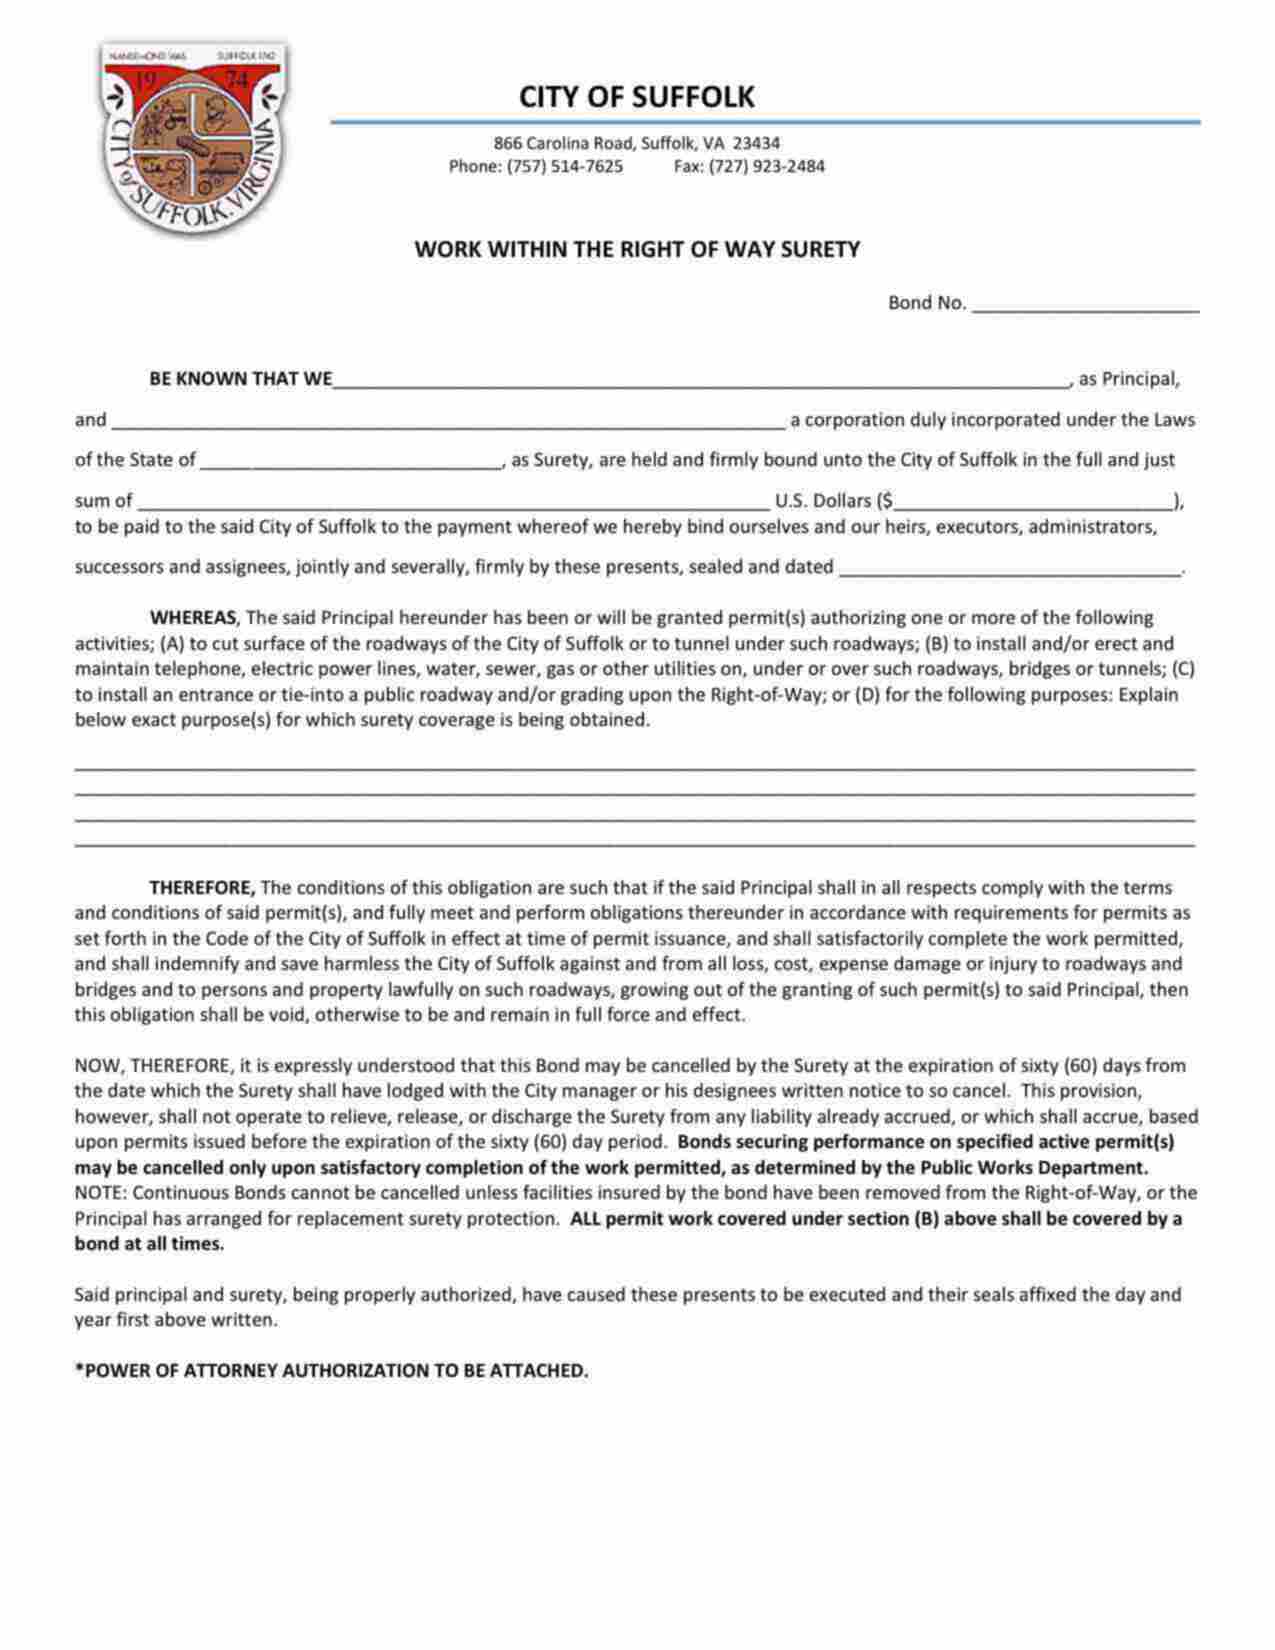 Virginia Right of Way - Single Project Bond Form